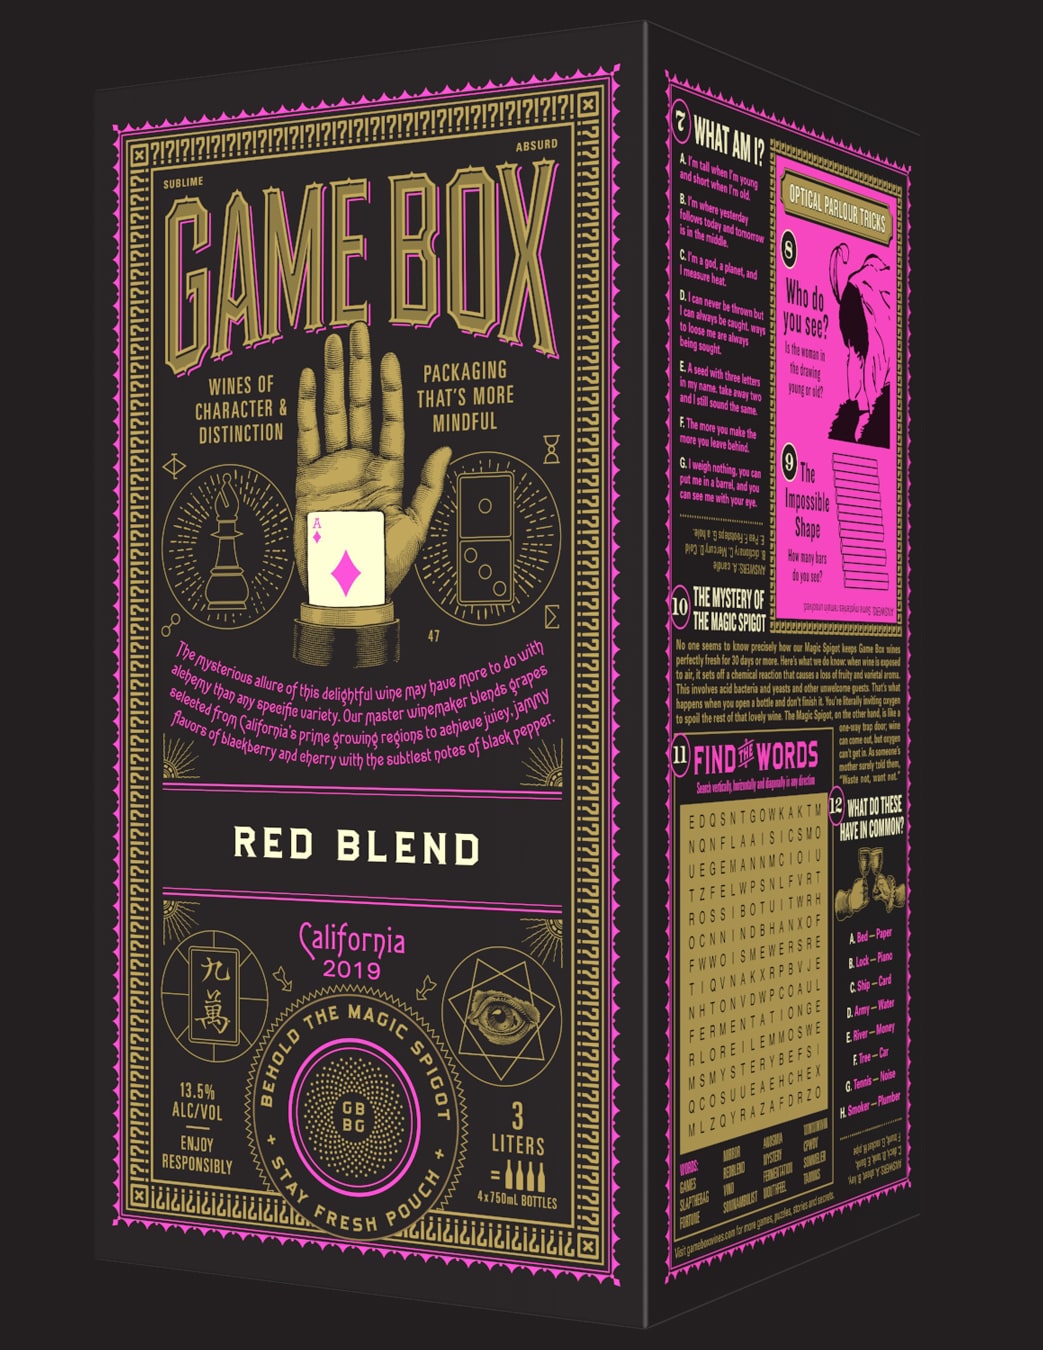 Game Box Wines Red Blend side panel design detail